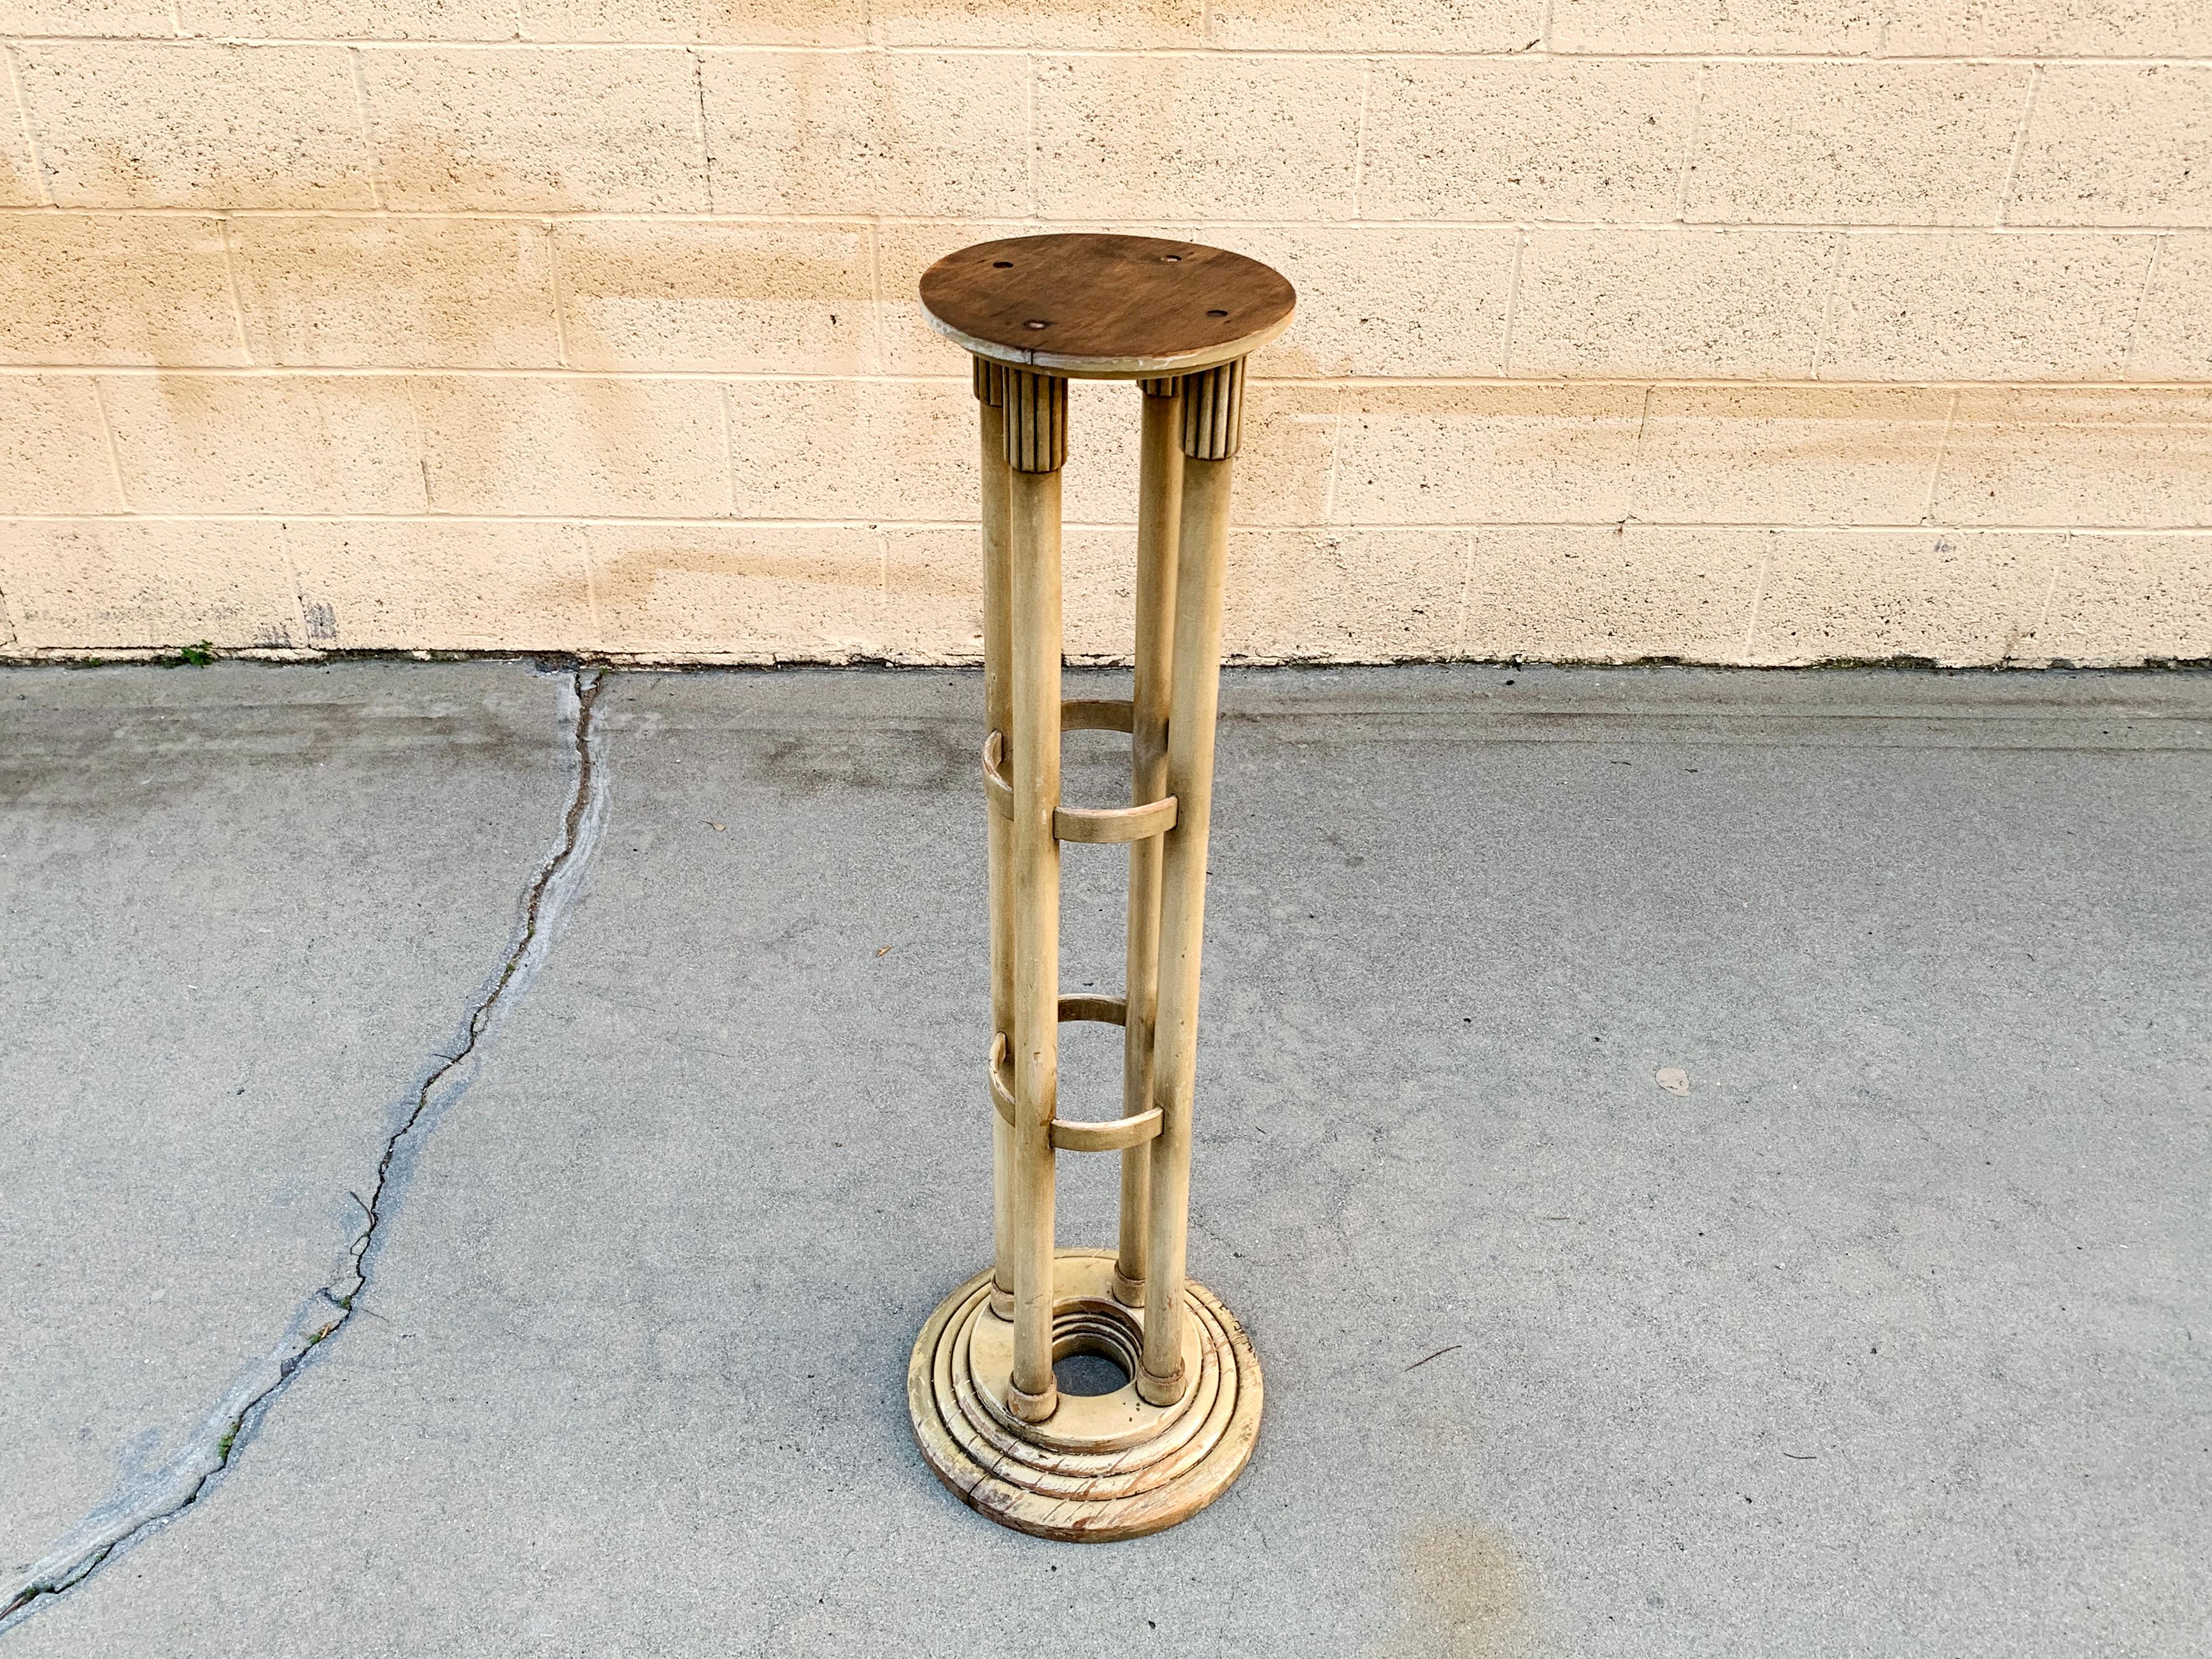 Vintage plant stand in the form of a neoclassical column. Art Deco/ Hollywood Regency styling. Original distressed finish with lacquer top coat. Structurally sound.

Dimensions: 38